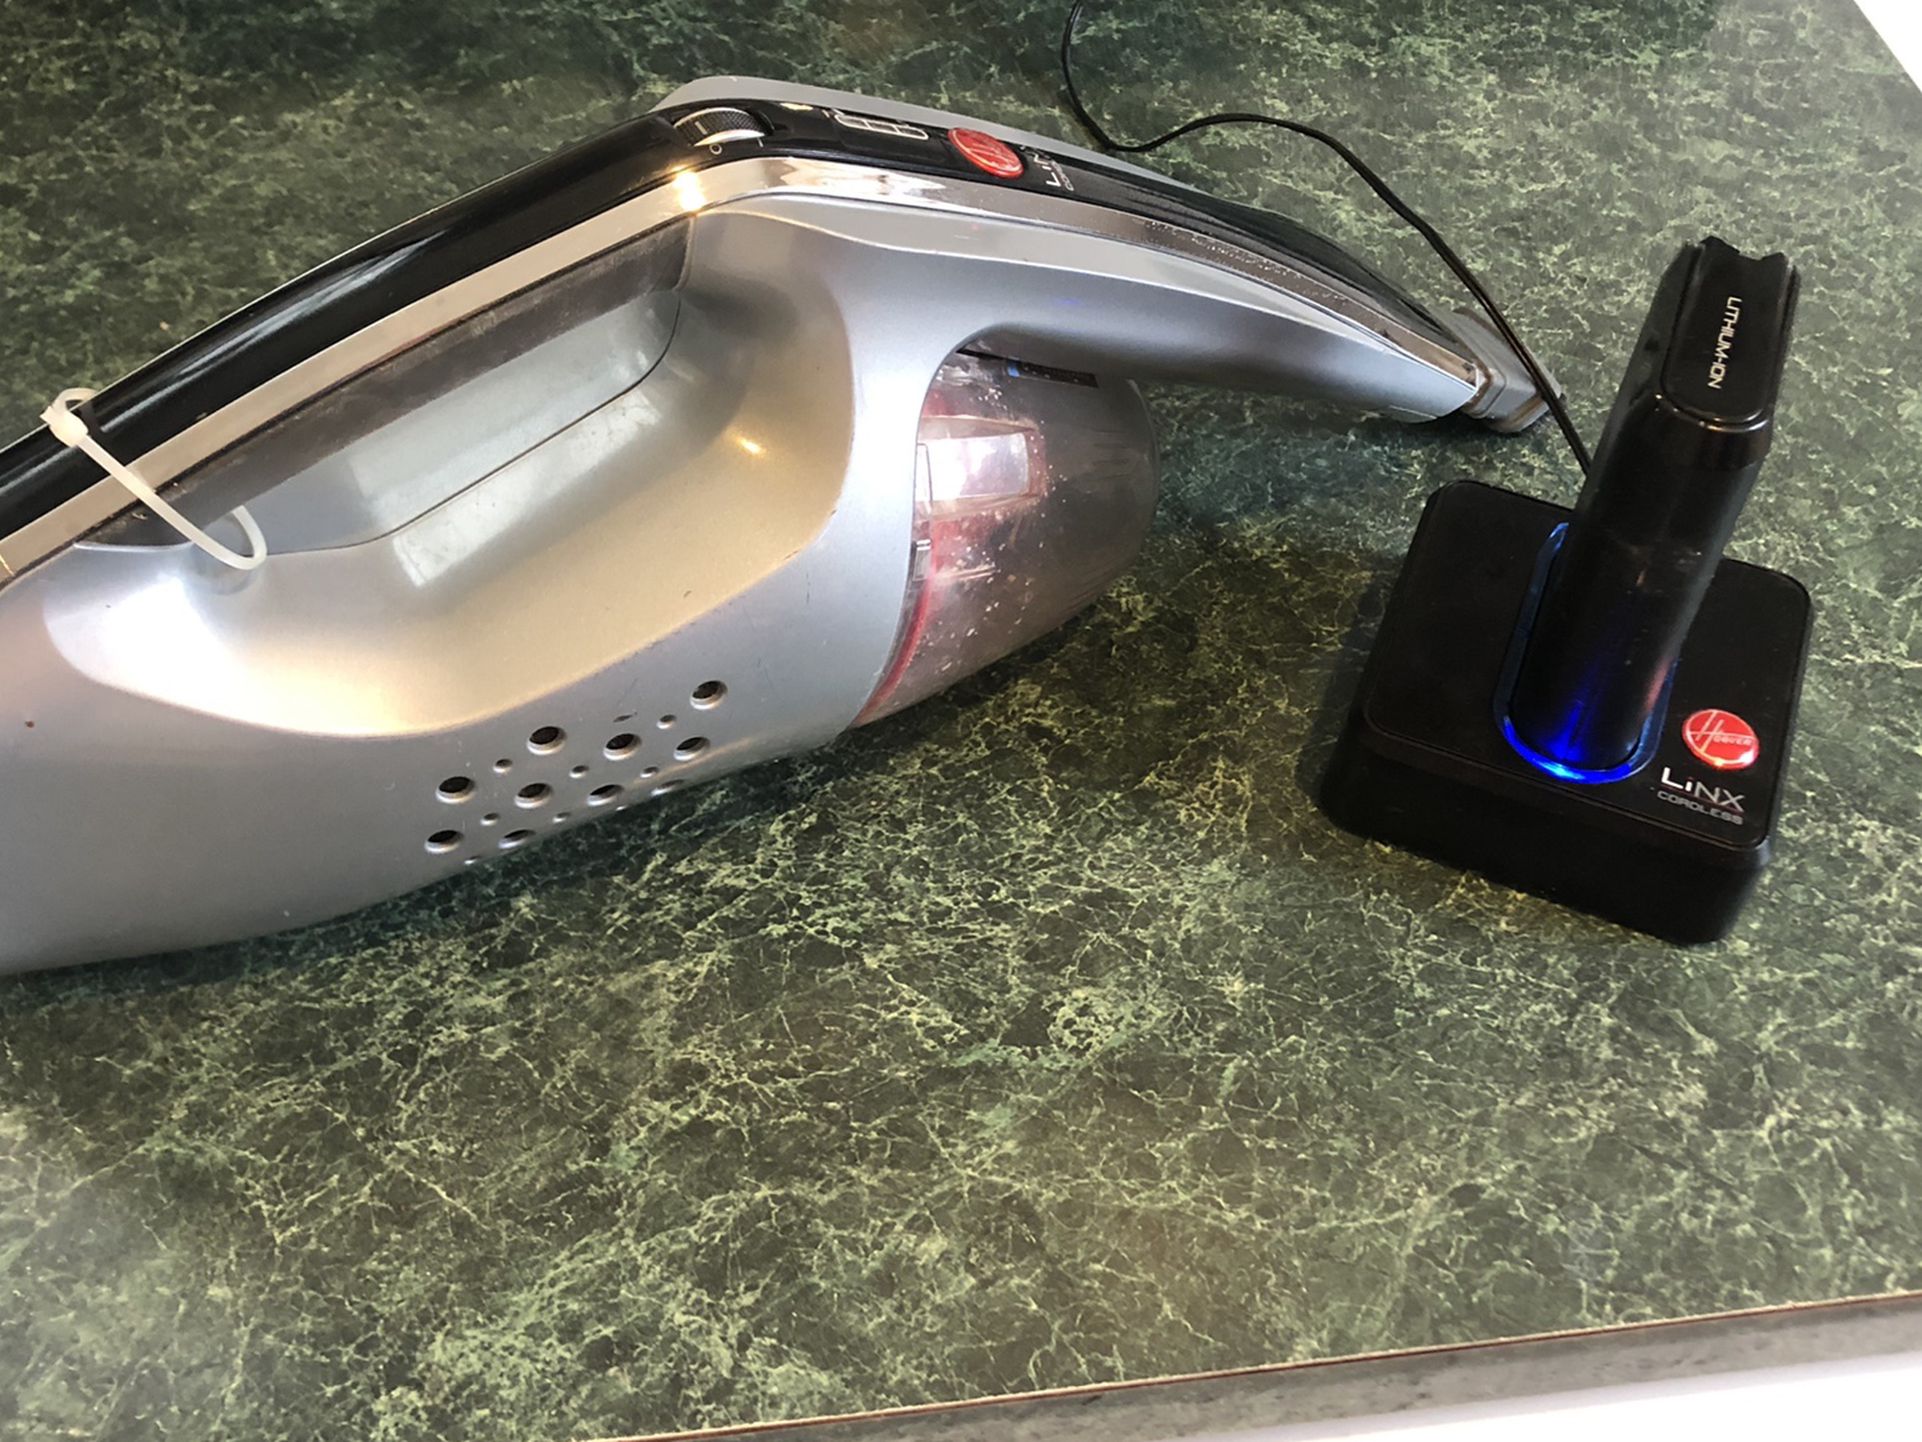 Hoover Linx Dustbuster